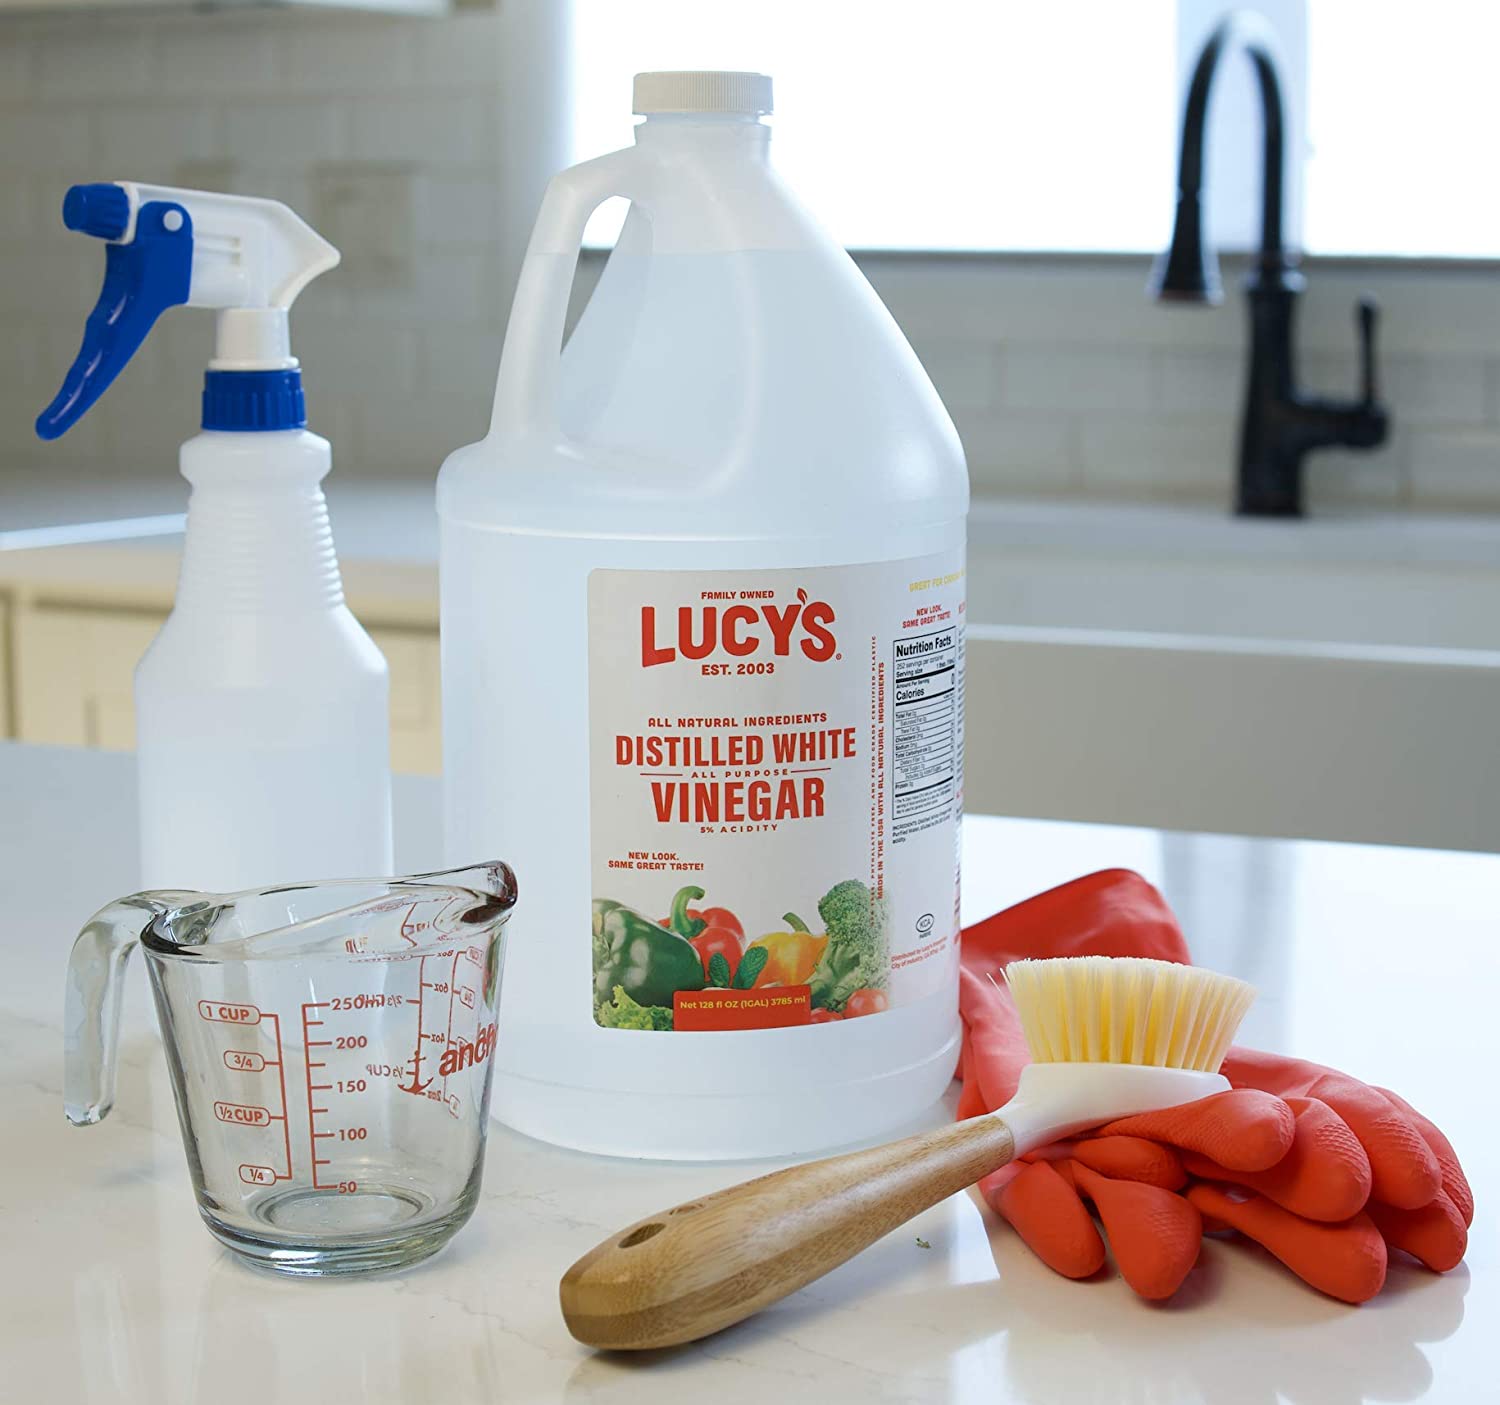 Lucy's Family Owned - Natural Distilled White Vinegar, 1 Gallon (128 oz) - 5% Acidity